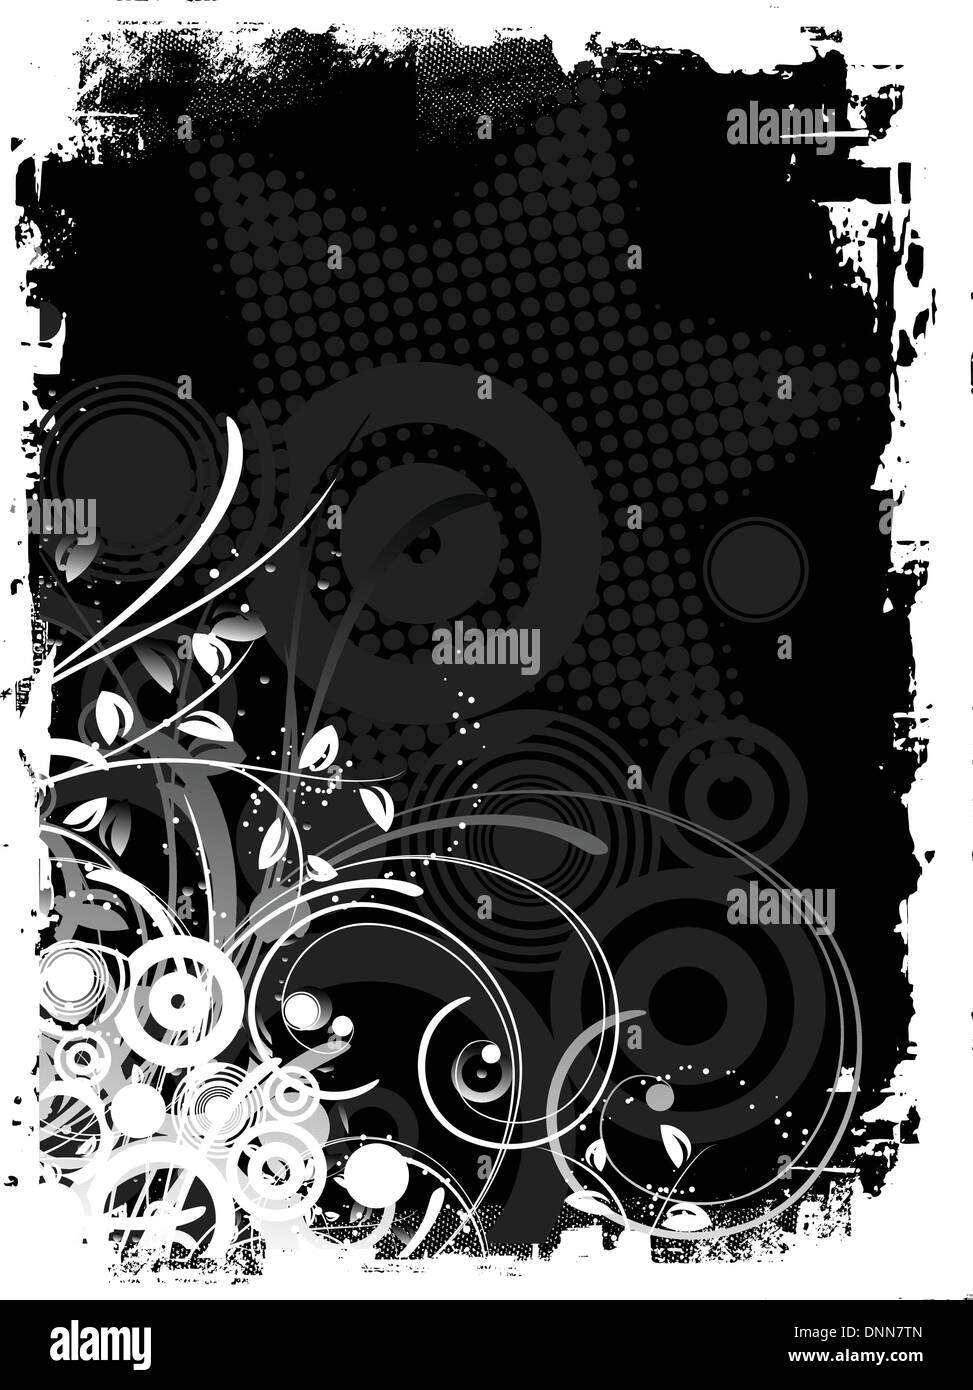 Decorative abstract floral grunge background Stock Vector